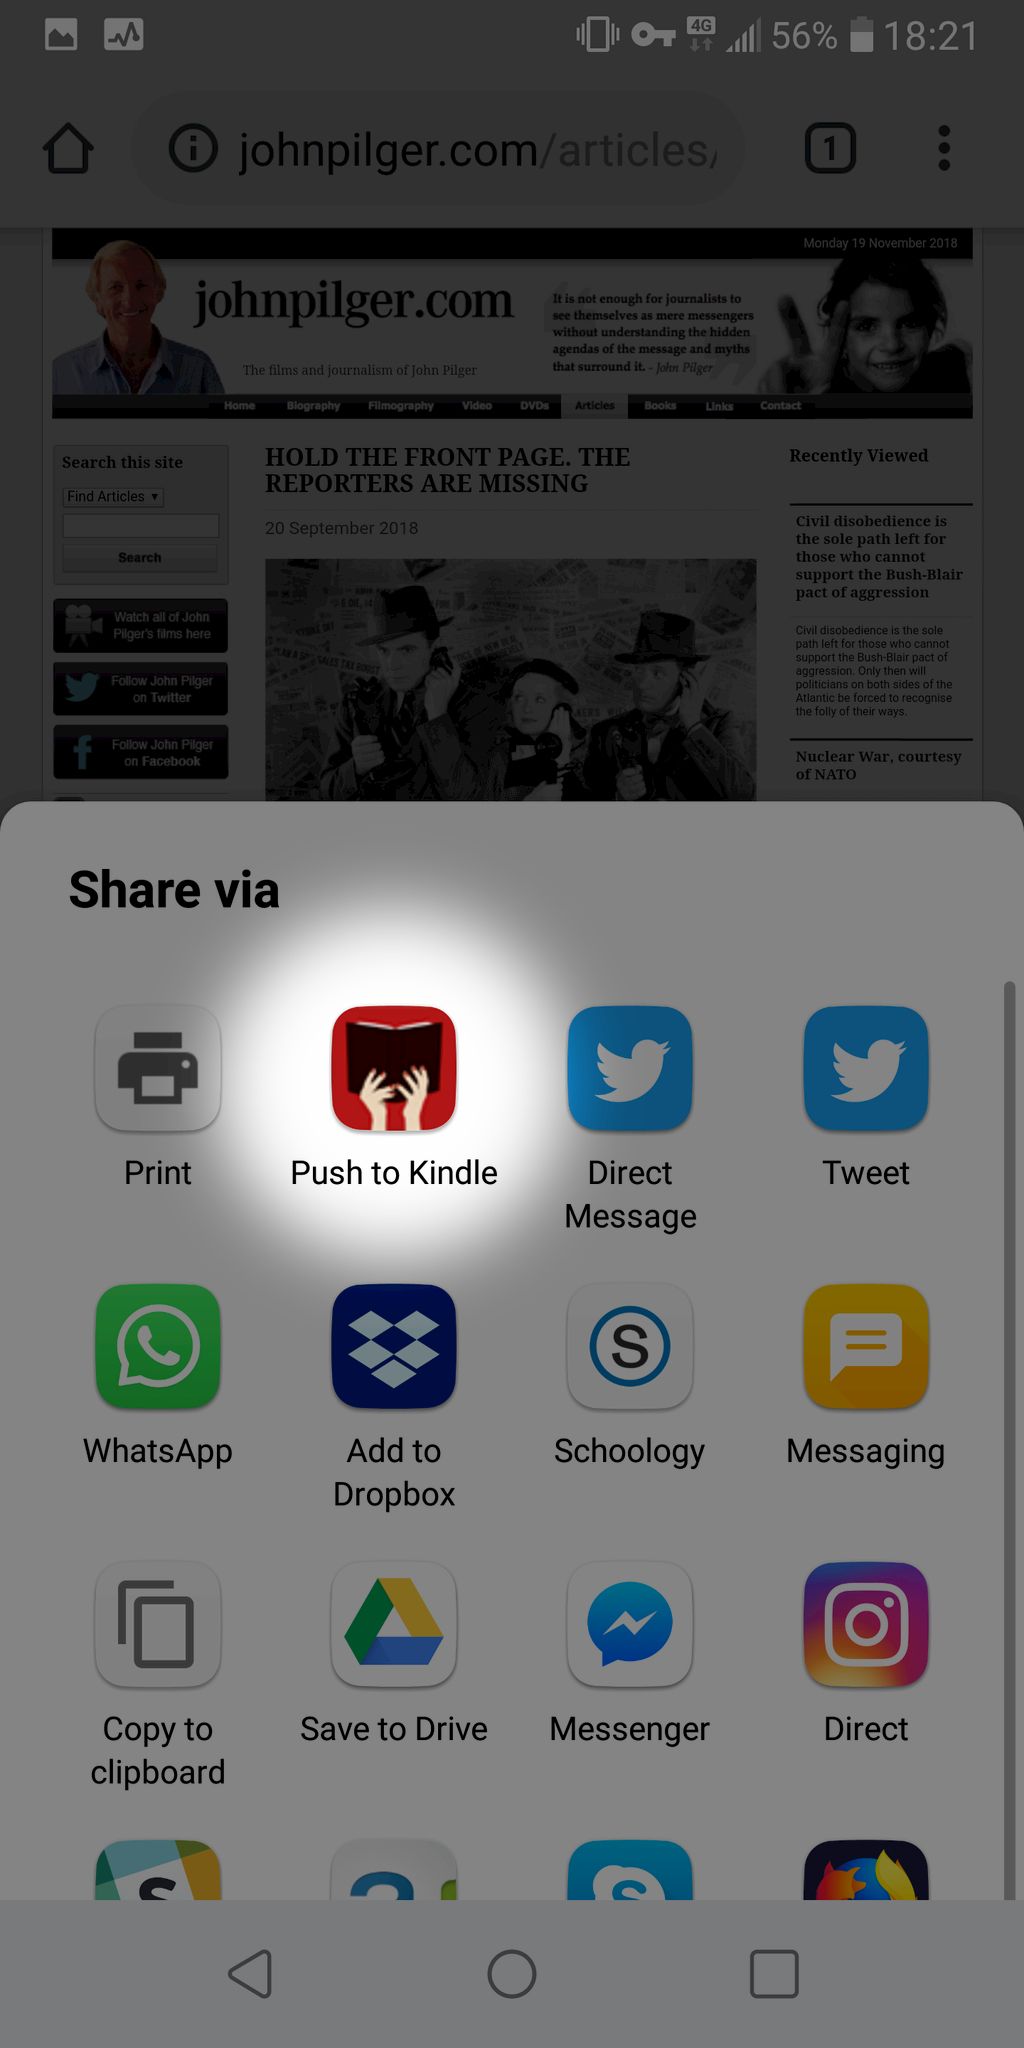 Send articles from phone to Kindle with Push to Kindle